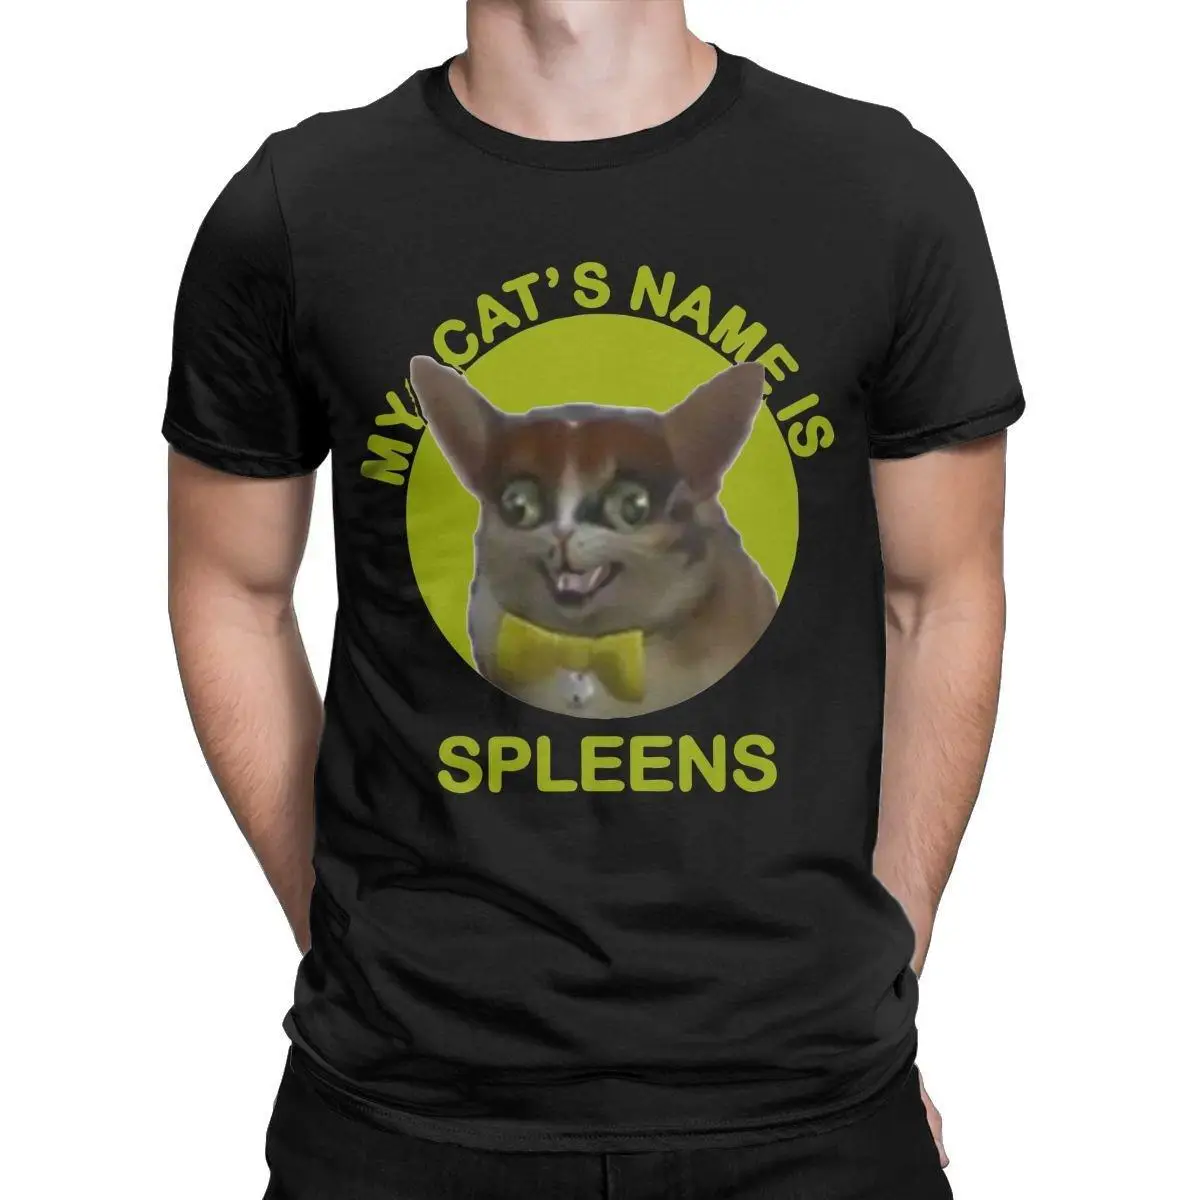 My Cat's Name Is Spleens T-Shirt Men Funny Cat Vintage Cotton Tees Round Collar Short Sleeve T Shirt Printed Tops